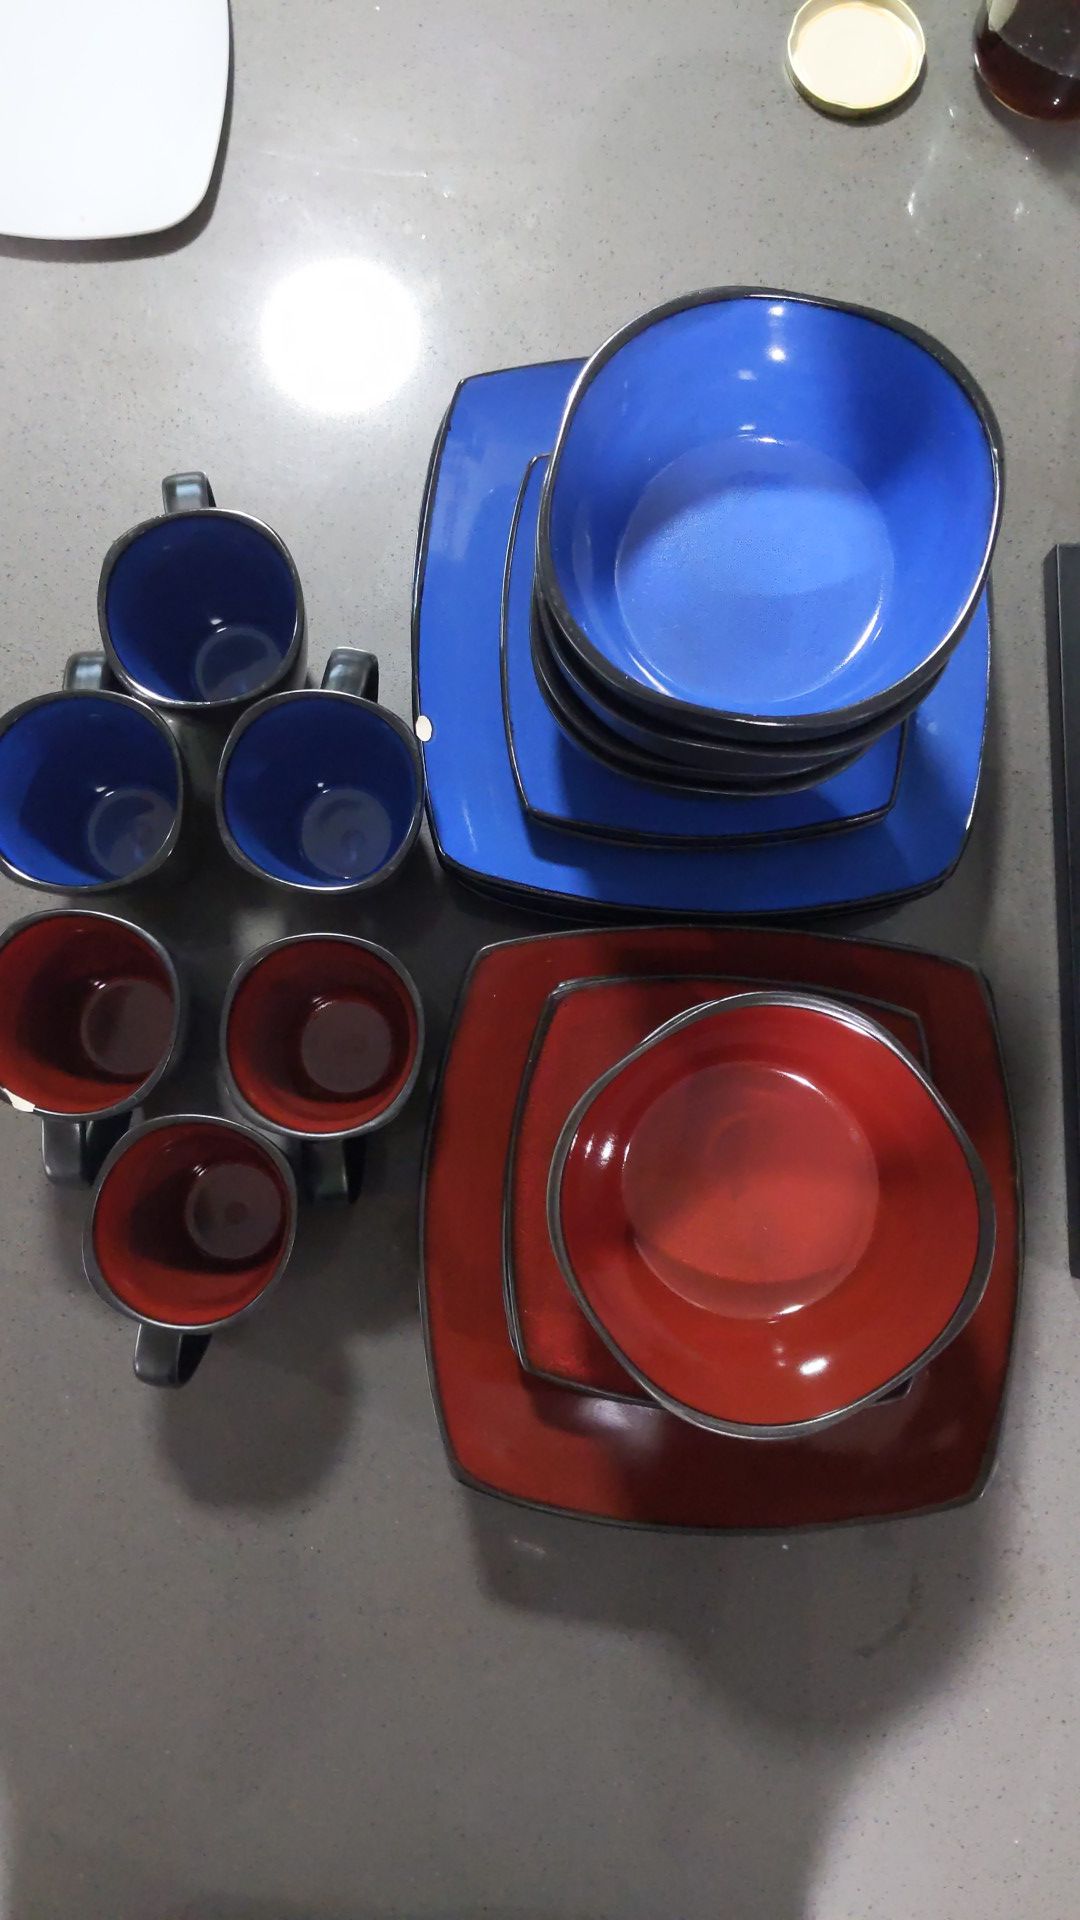 Gibson - 2 Dinnerware Sets - Red and Blue - plates, bowls, coffee cups